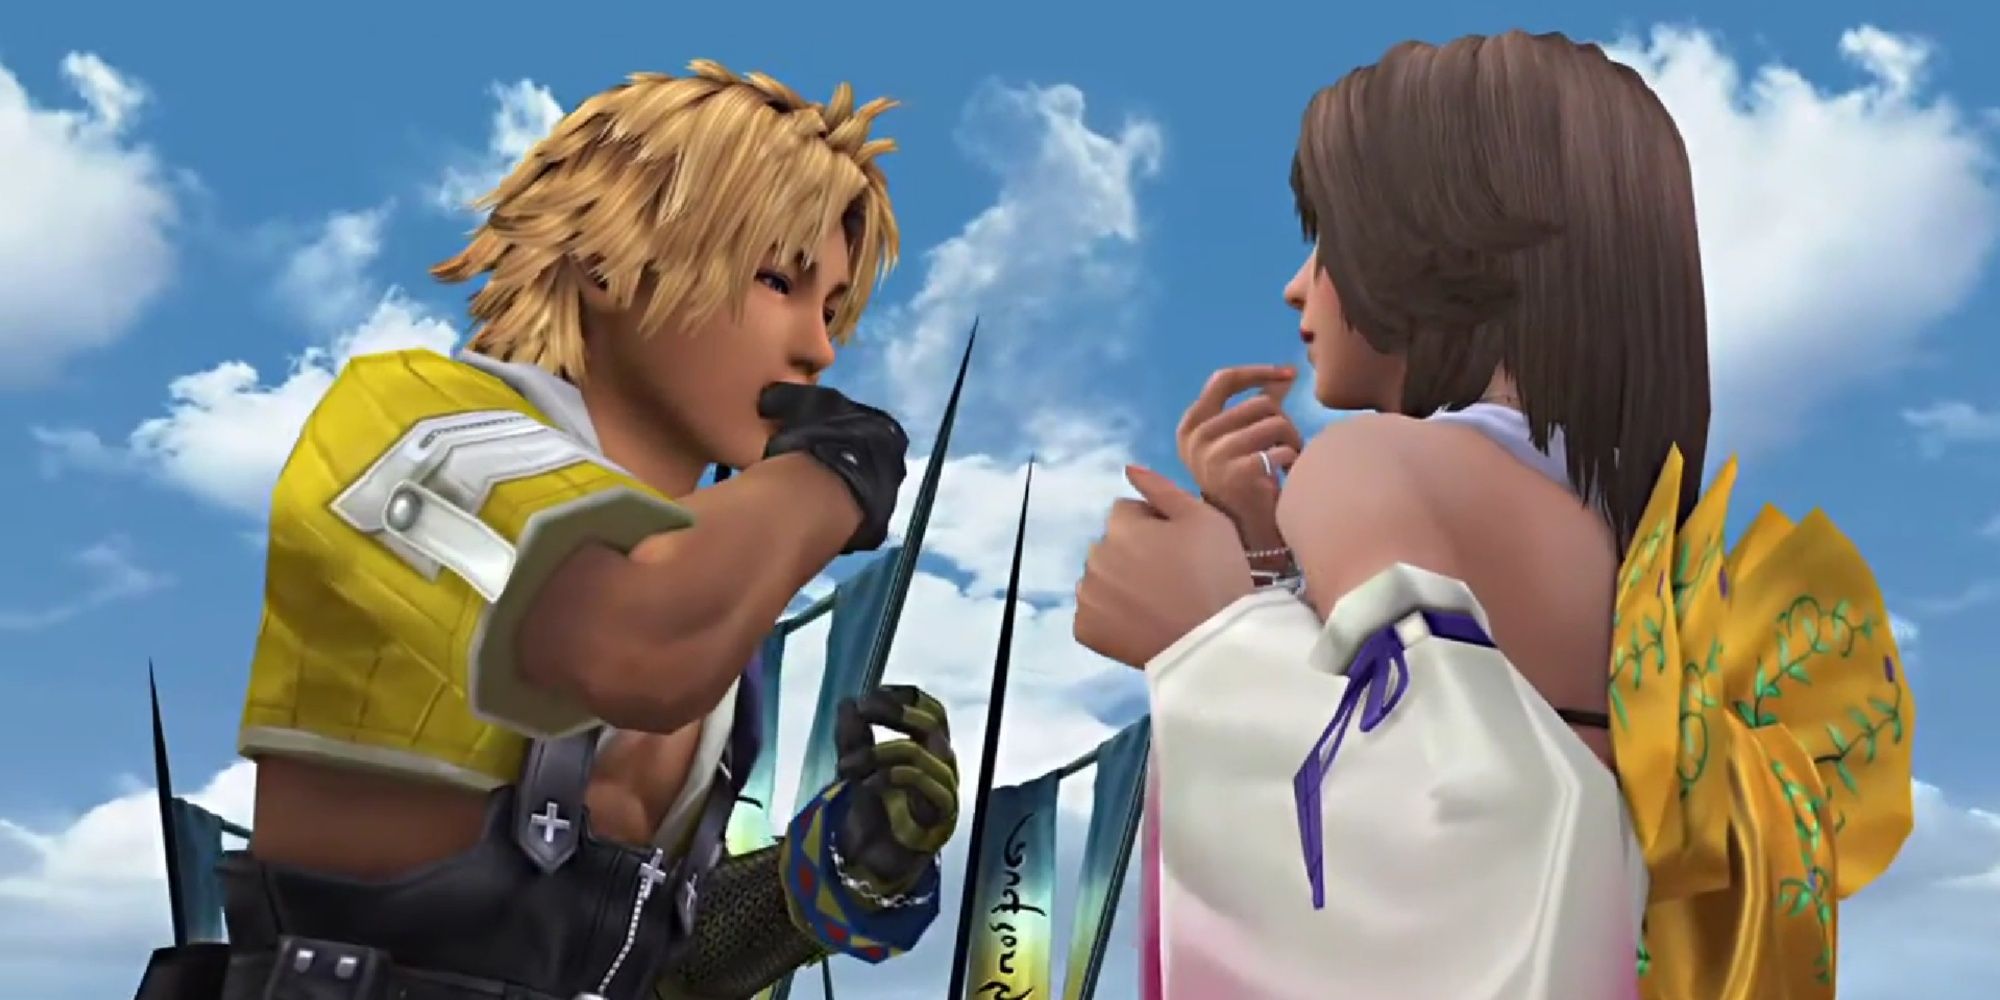 yuna and tidus whistling in final fantasy 10